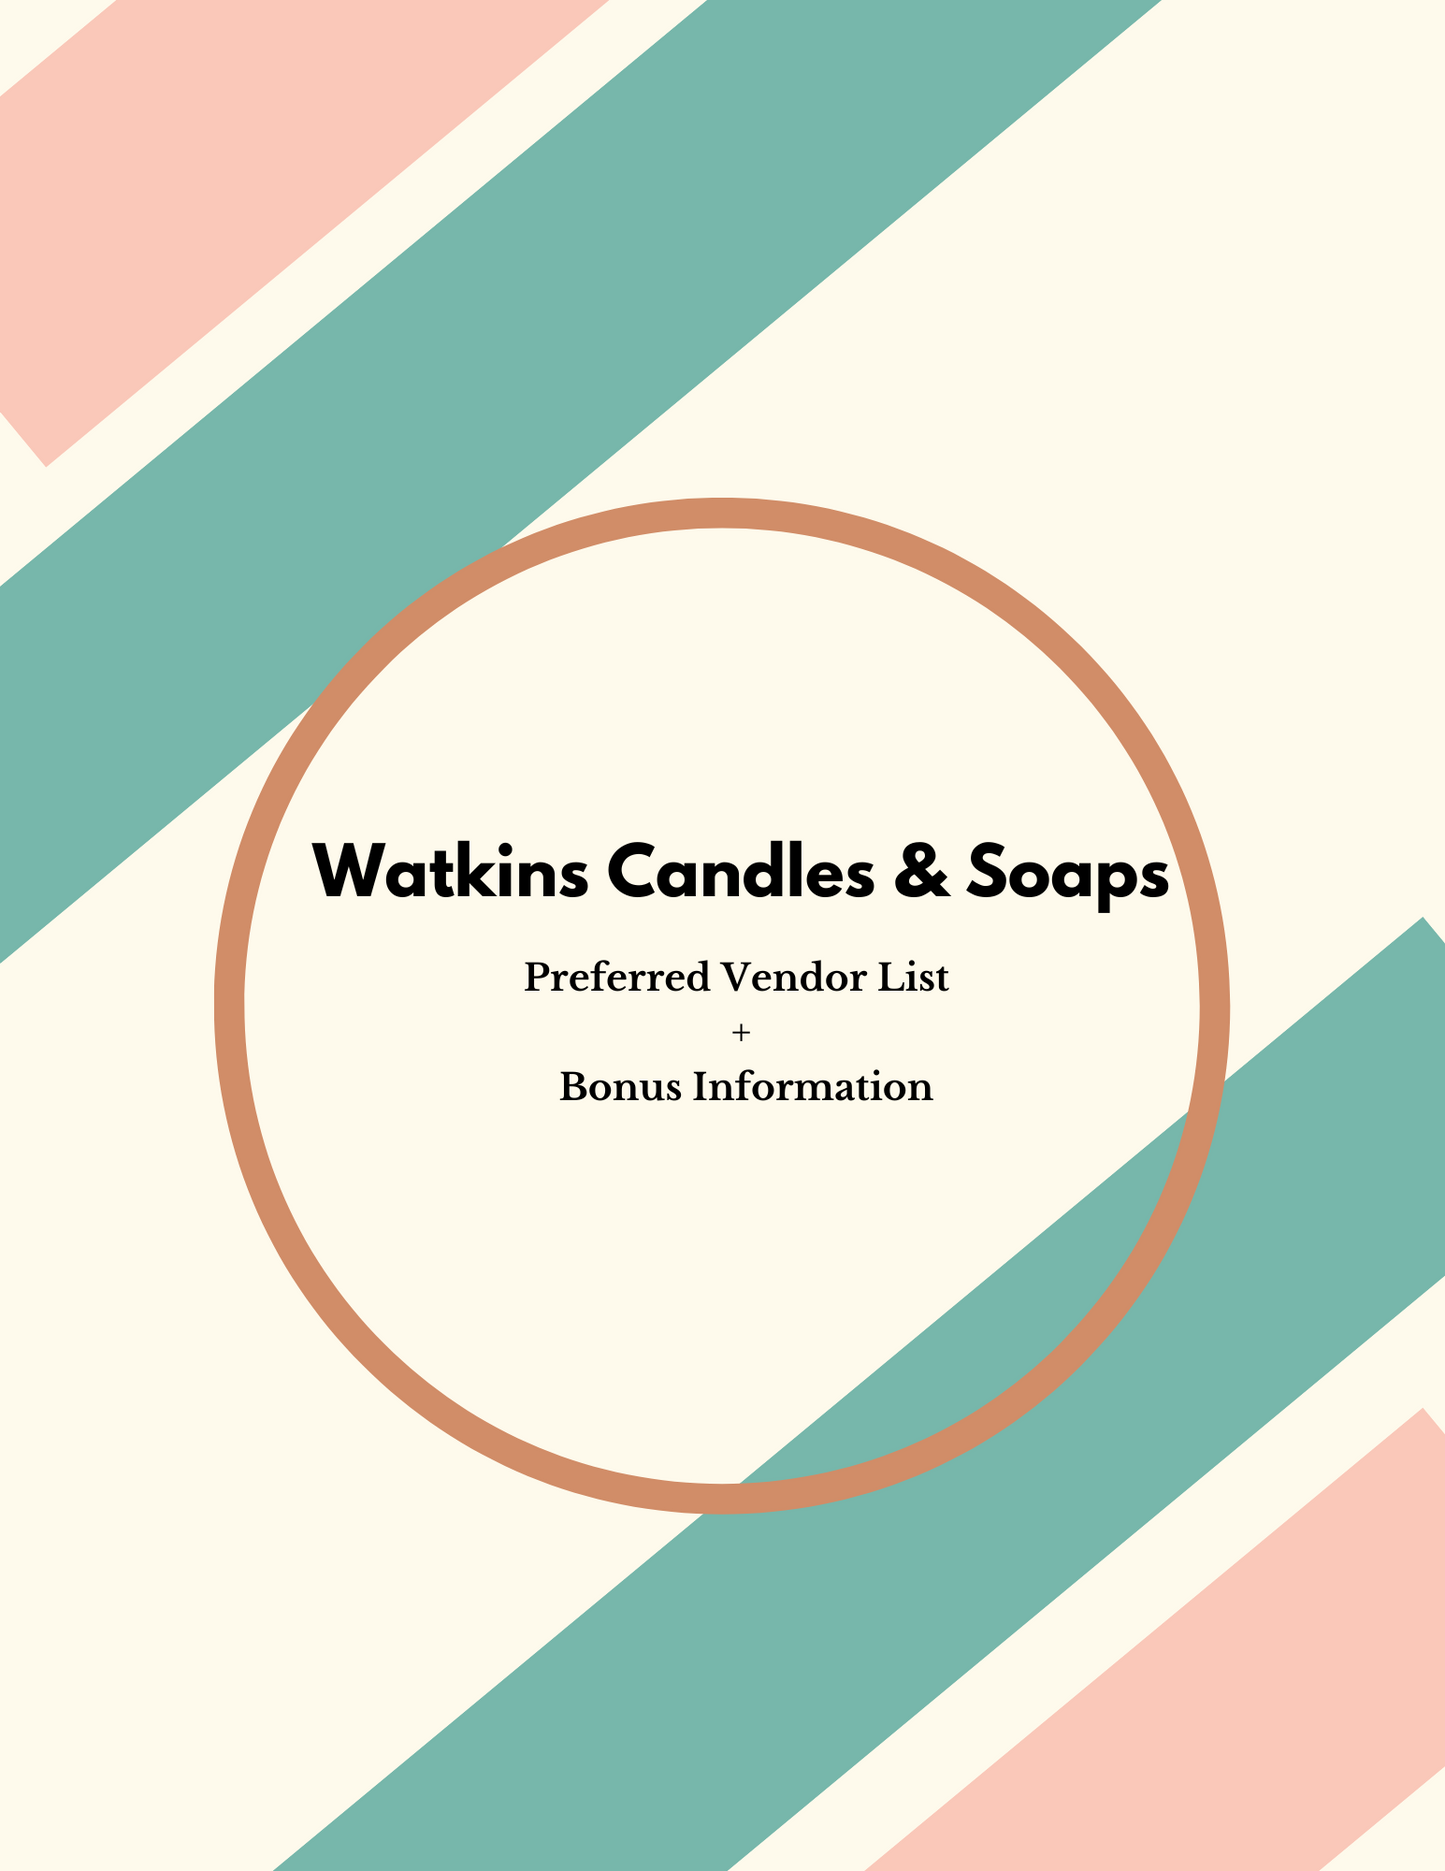 Watkins Candles and Soaps Preferred Vendor List